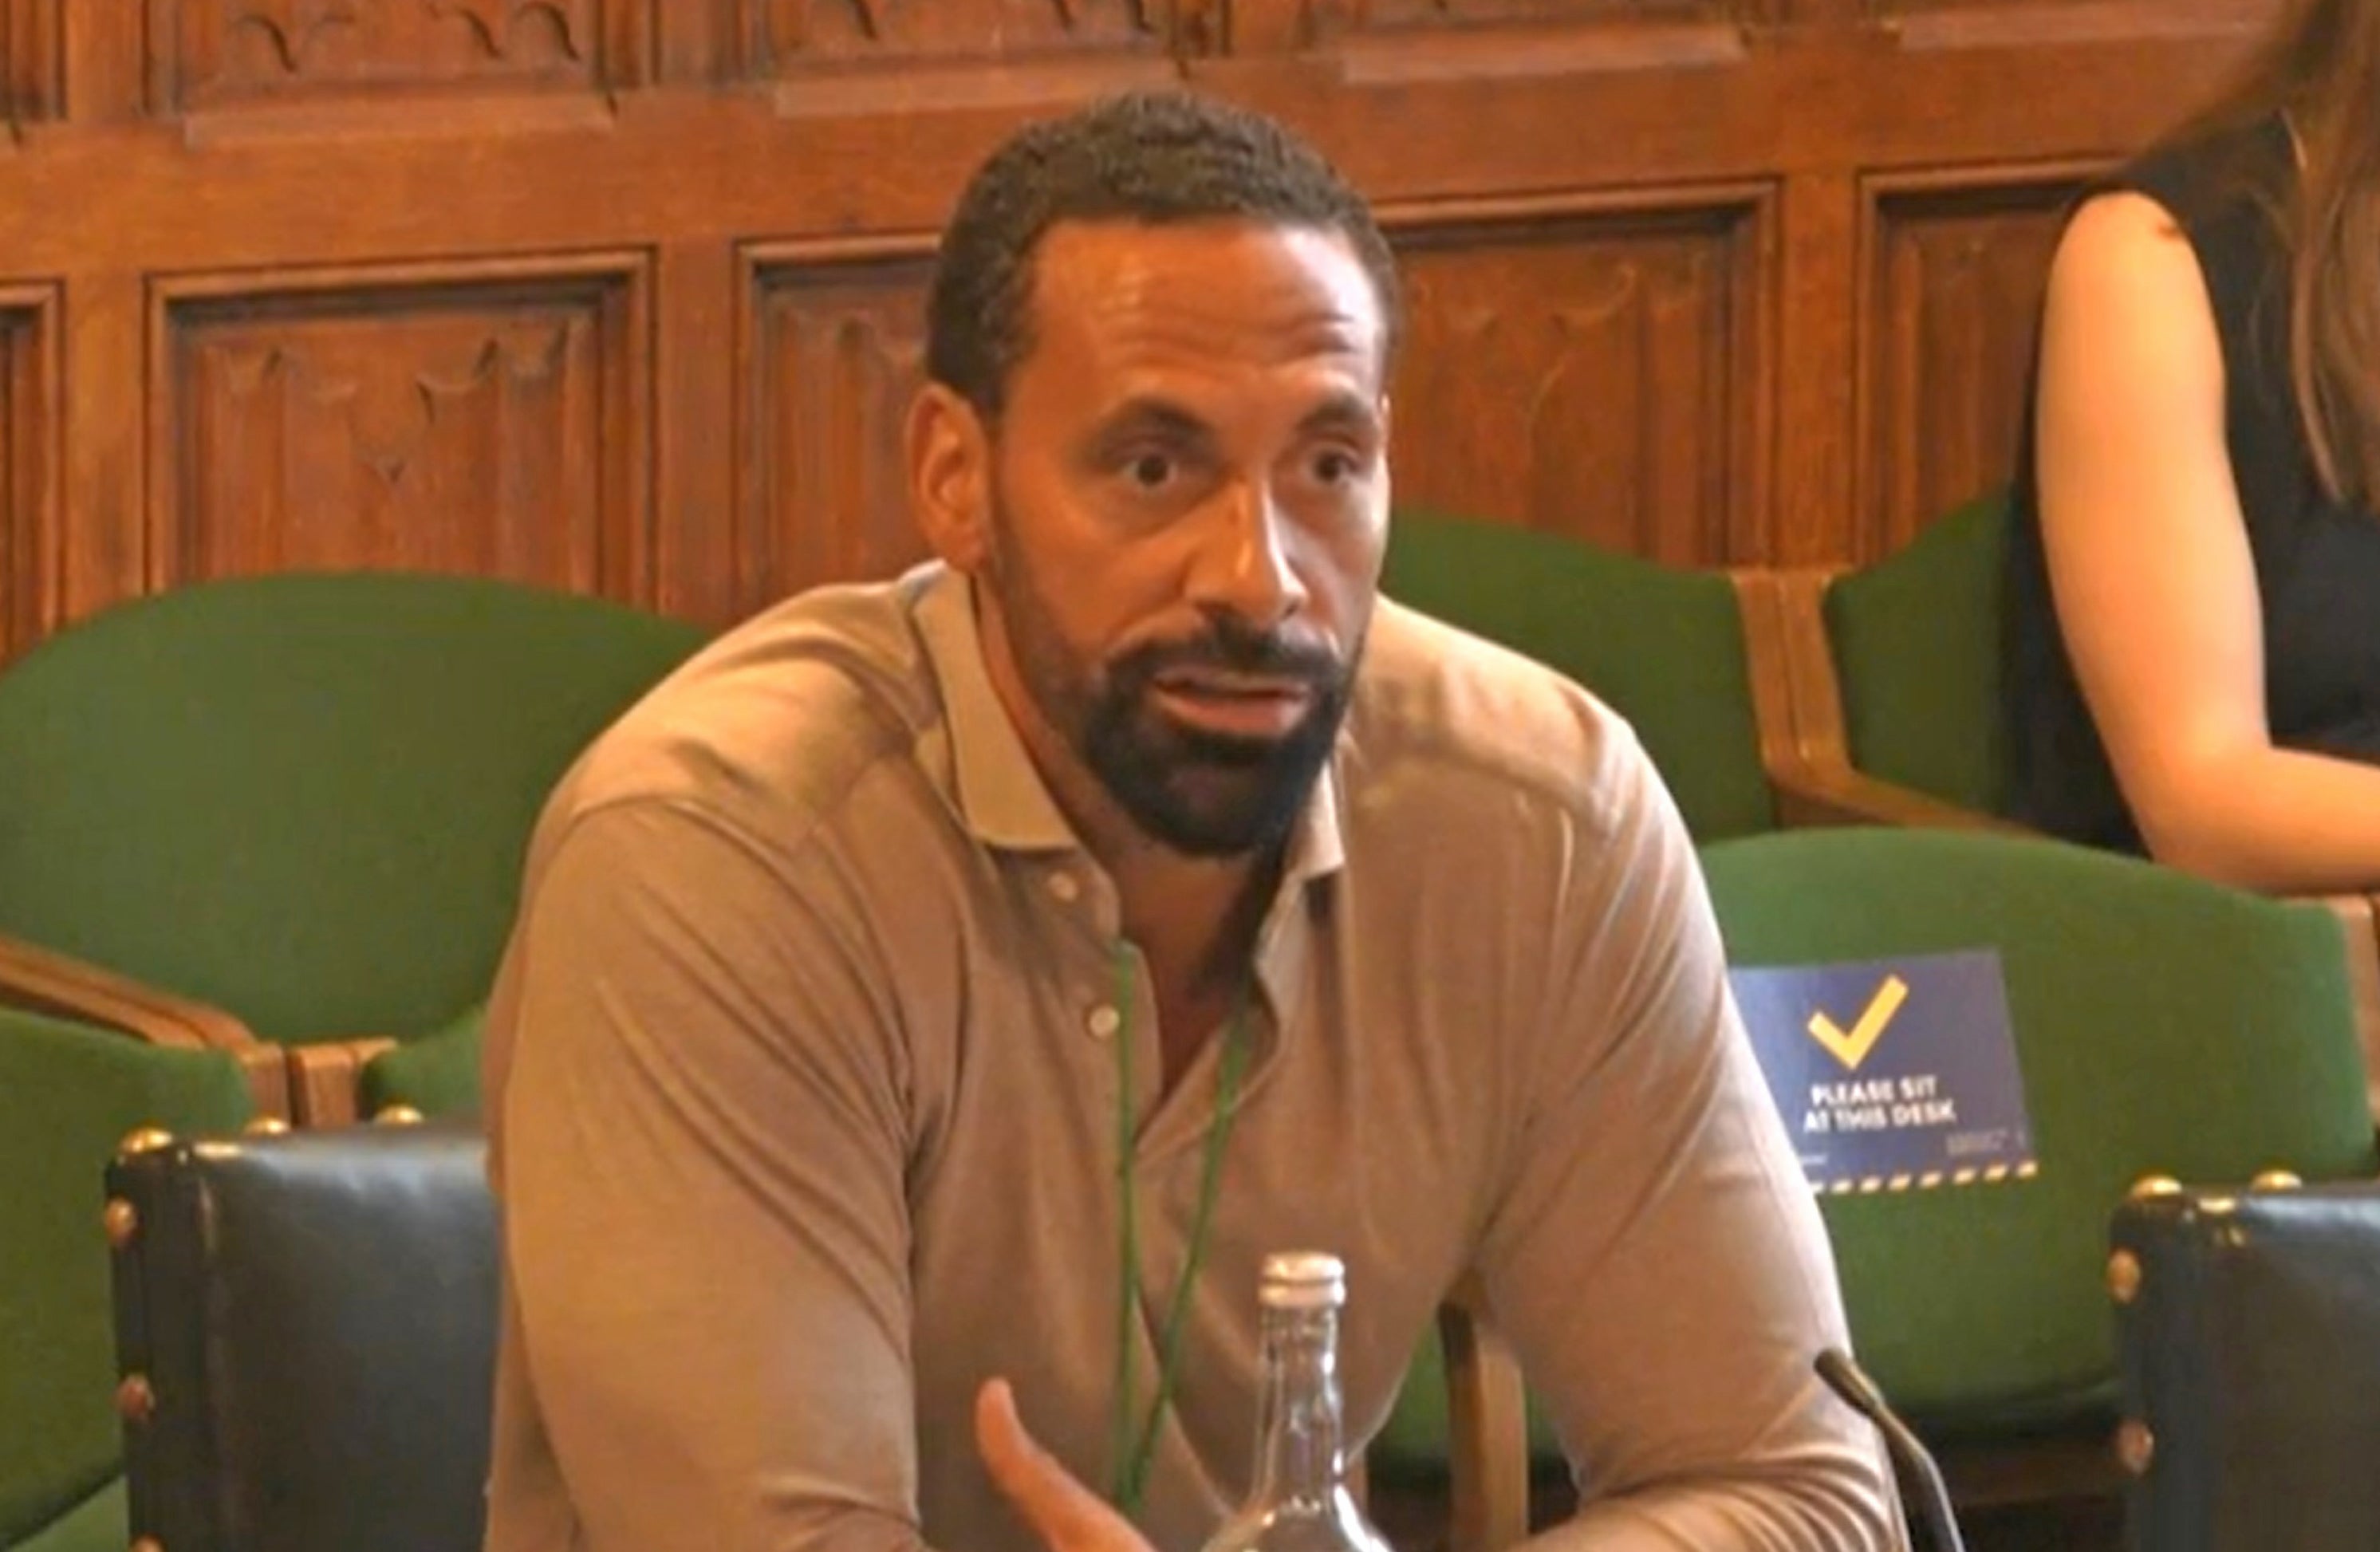 Rio Ferdinand giving evidence to joint committee seeking views on how to improve the draft Online Safety Bill (House of Commons/PA)